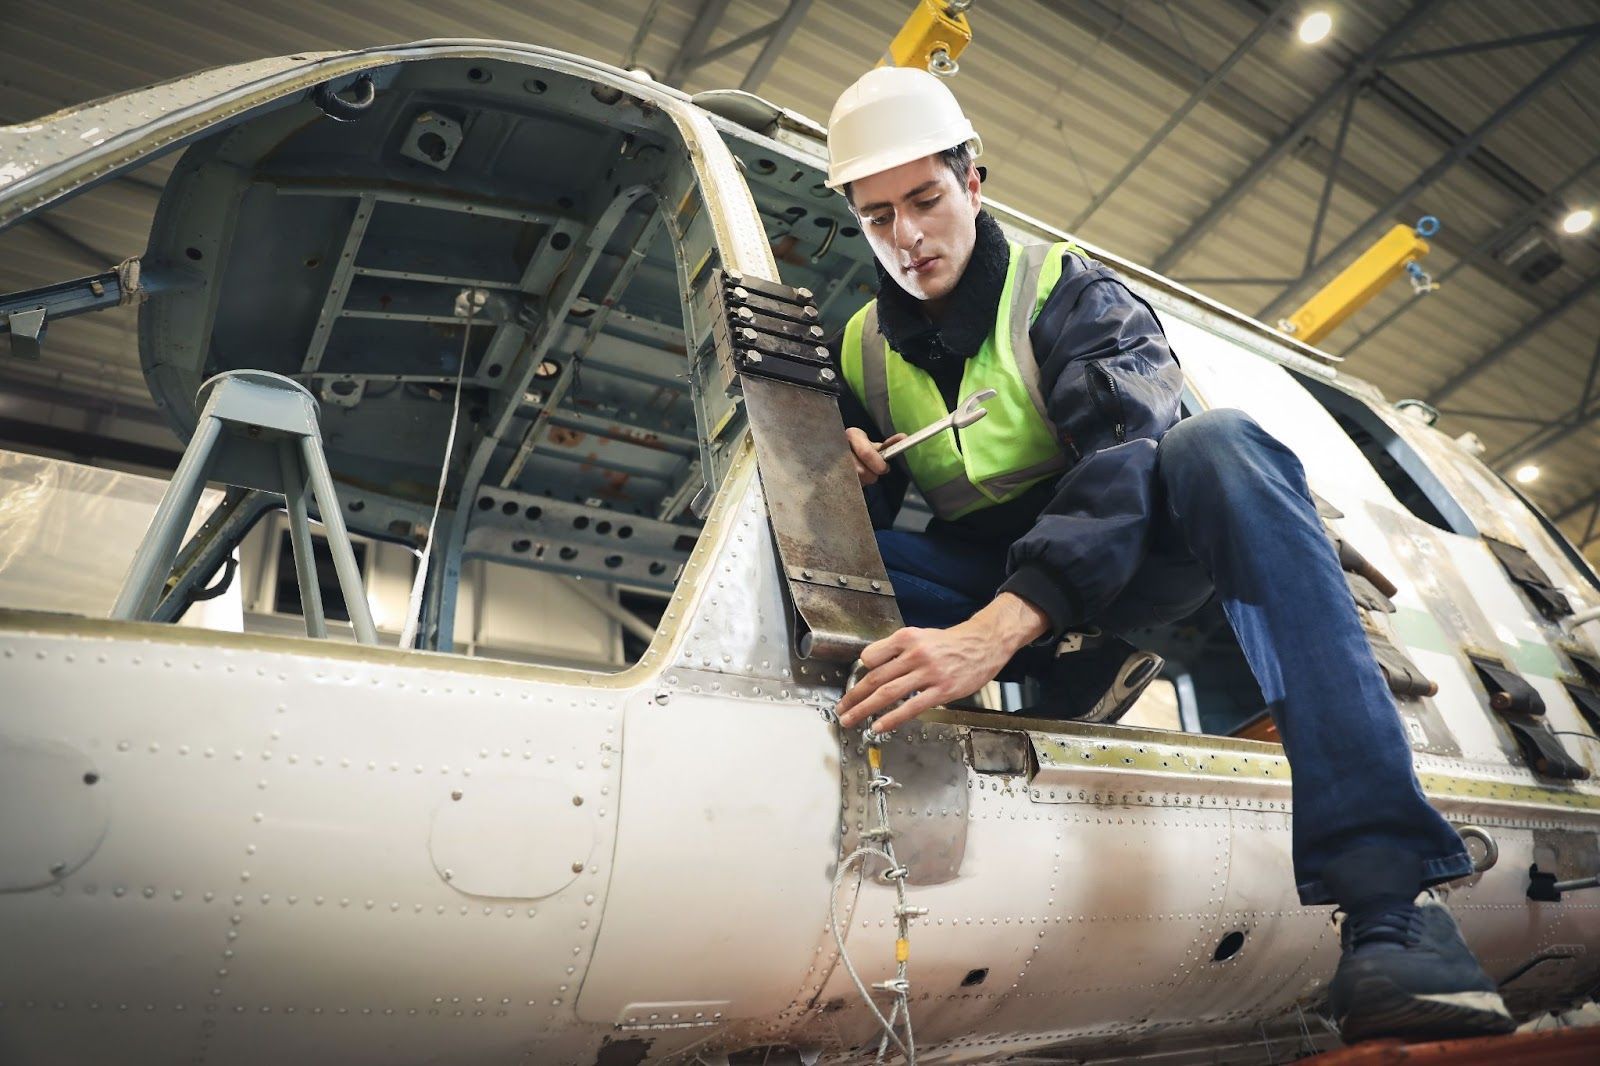 Benefits Of Stainless Steel In The Aerospace Industry